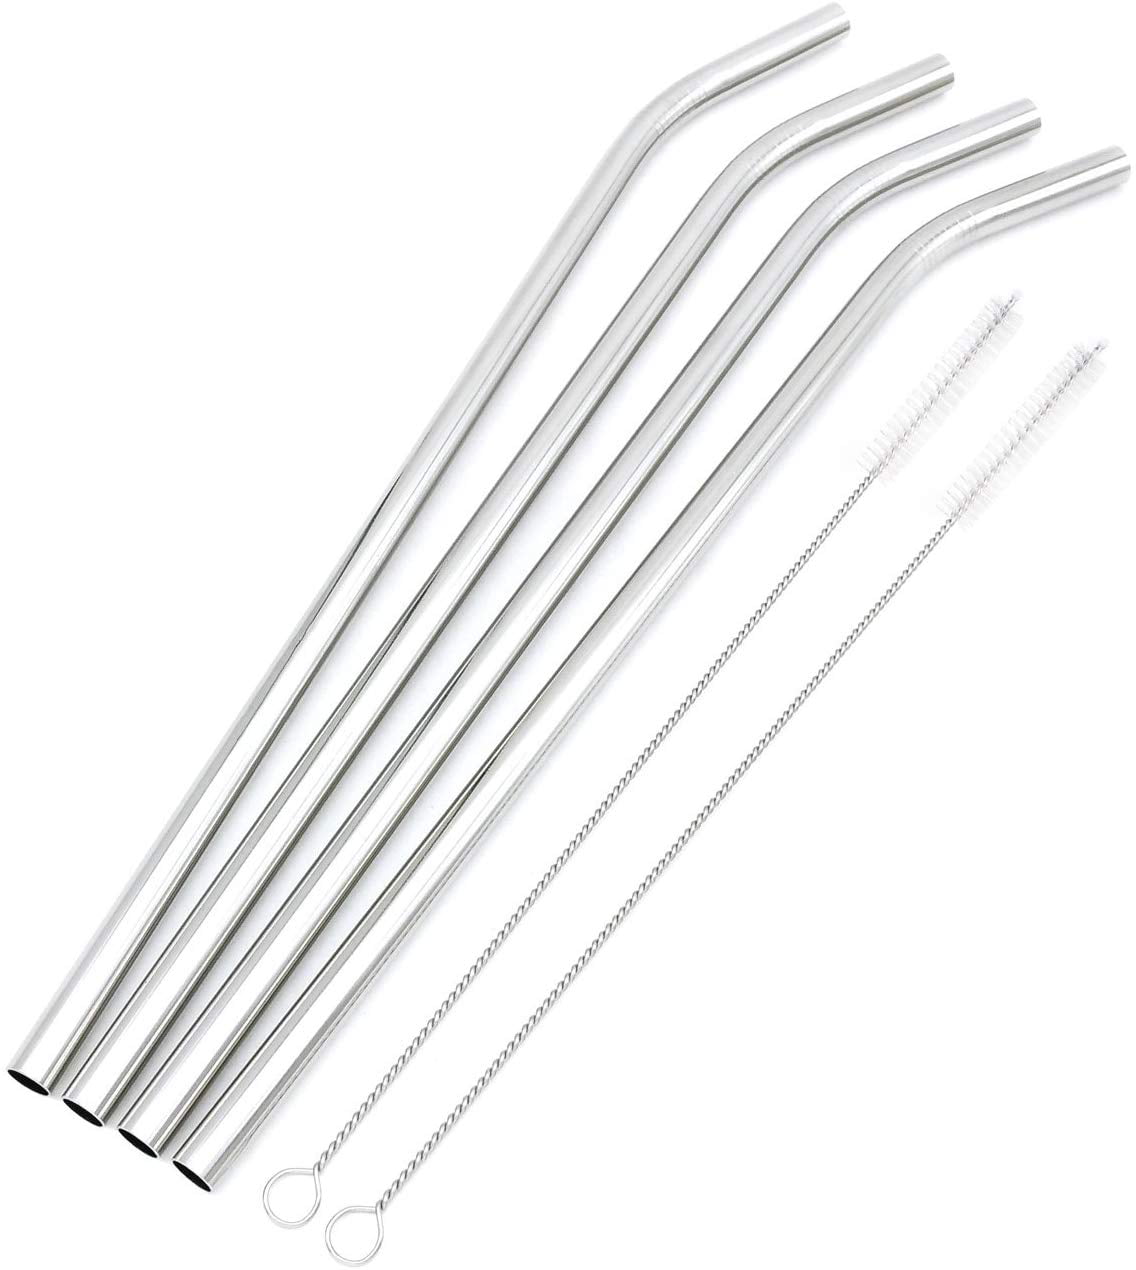 7 Color Avail Premium Stainless Steel Metal Drinking Straw inc Extra Wide Long